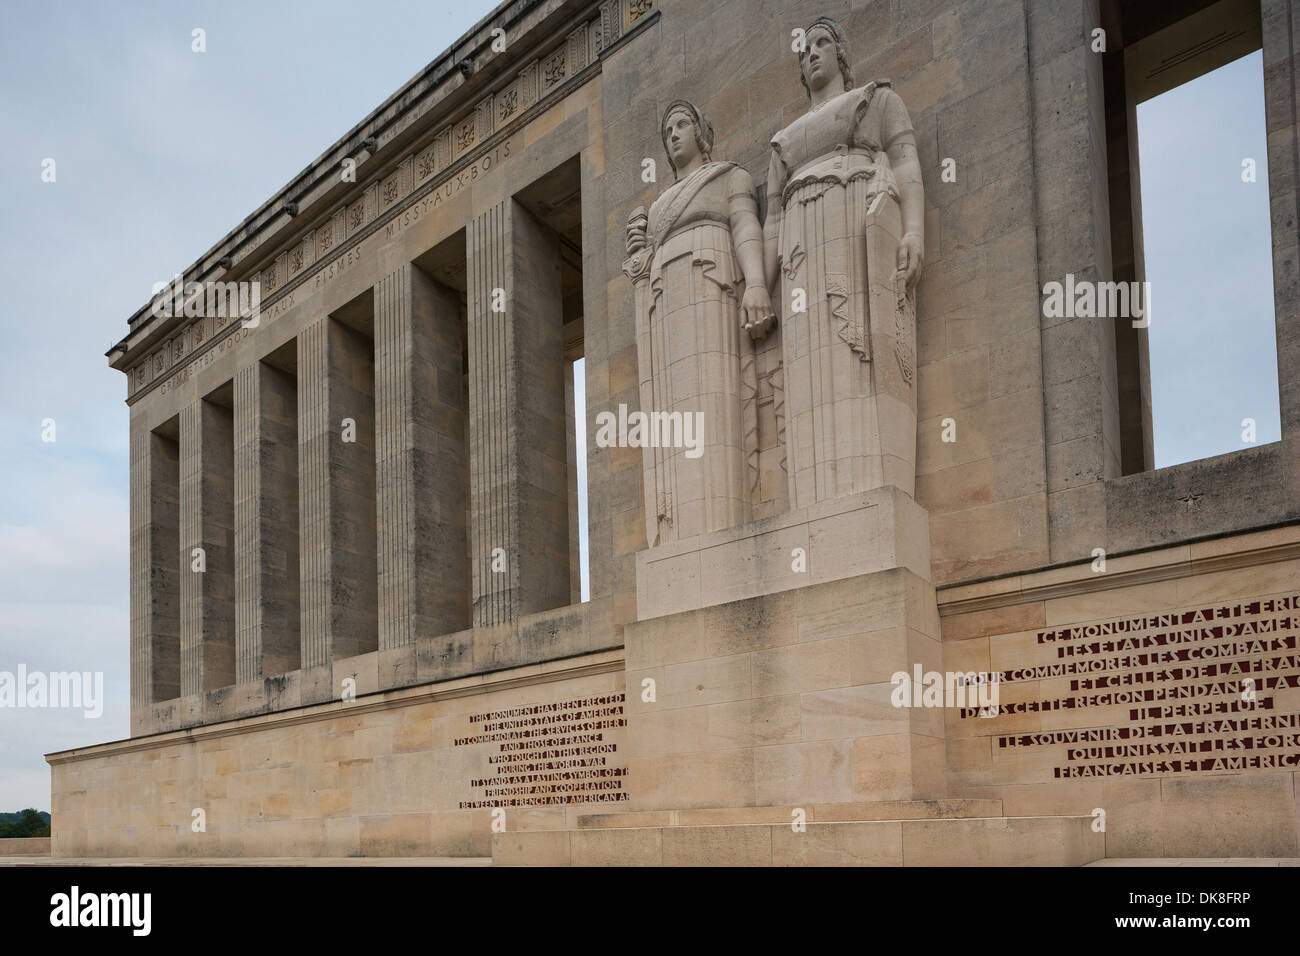 Part of the facade with statues Stock Photo